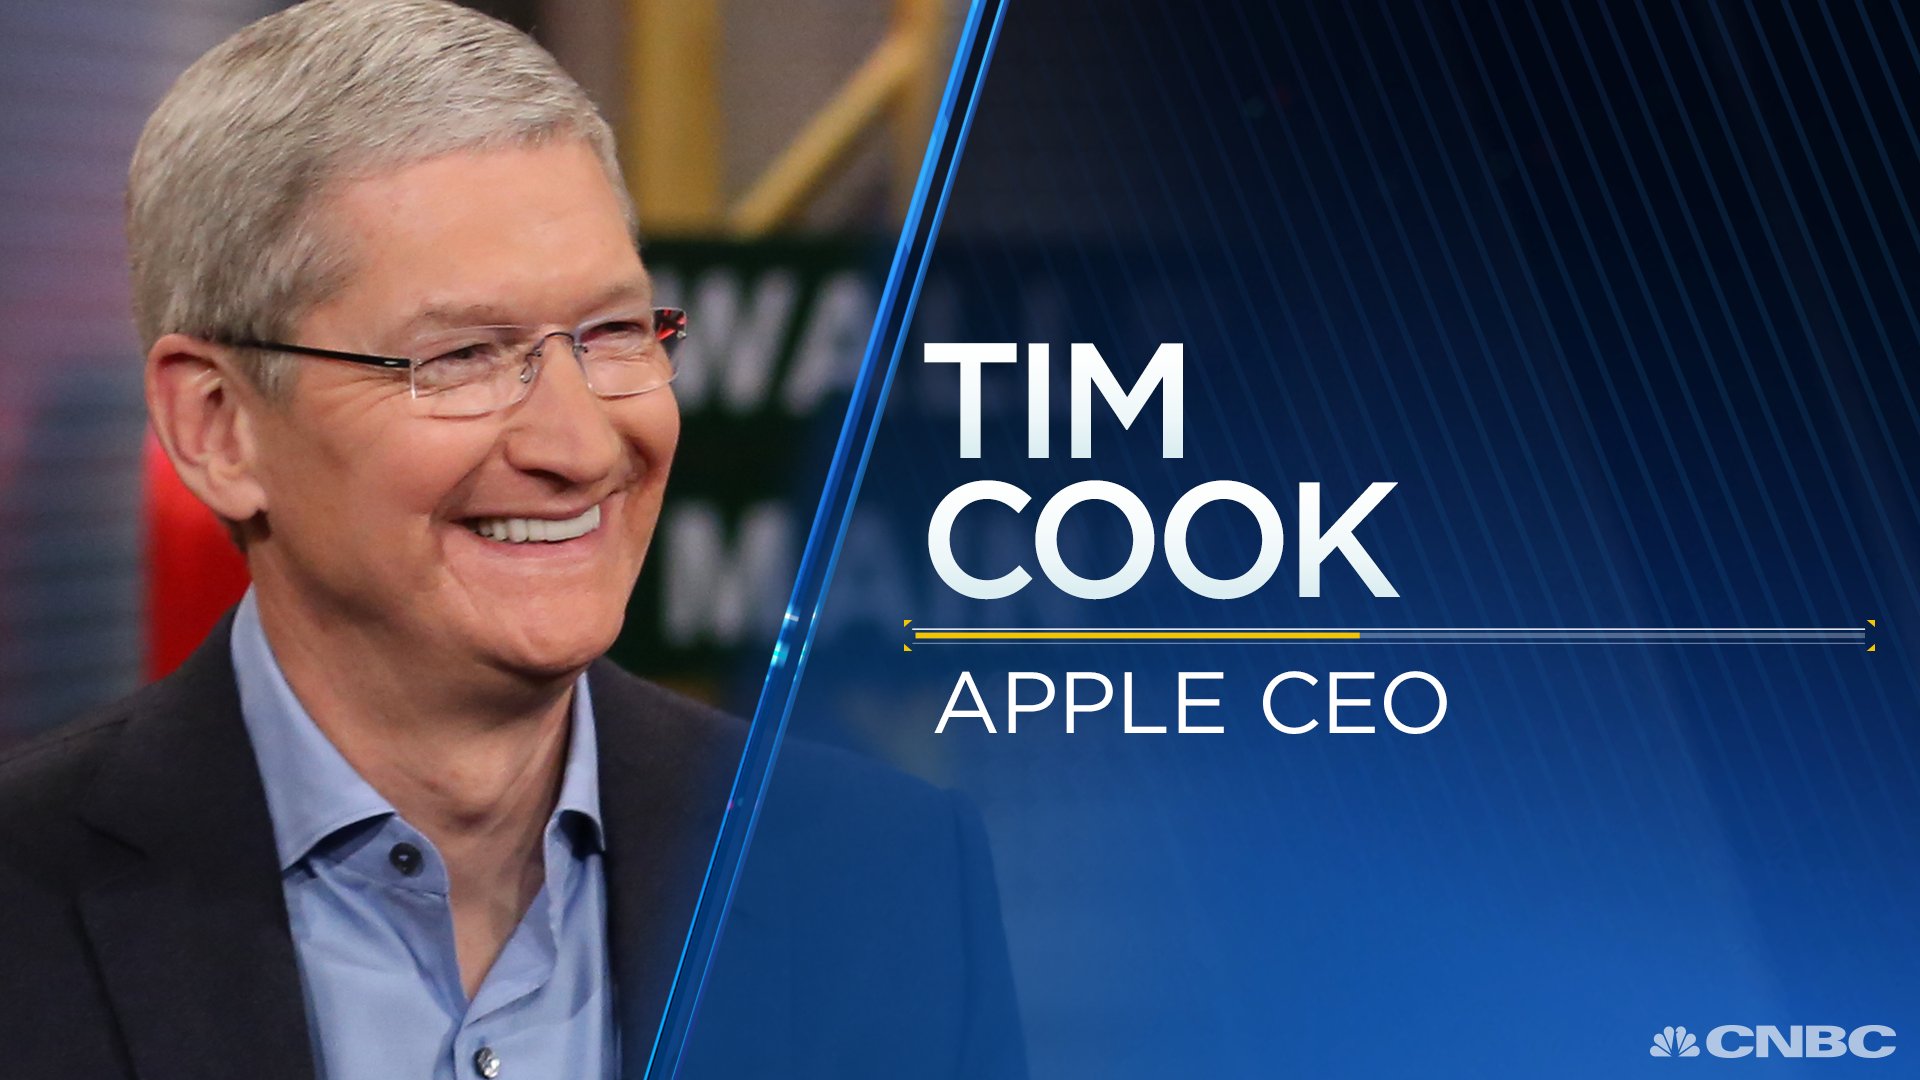 CNBC Now on Twitter: "BREAKING: Nike appoints Apple CEO Tim Cook as lead  independent director https://t.co/6Ru7qnmu1z" / Twitter